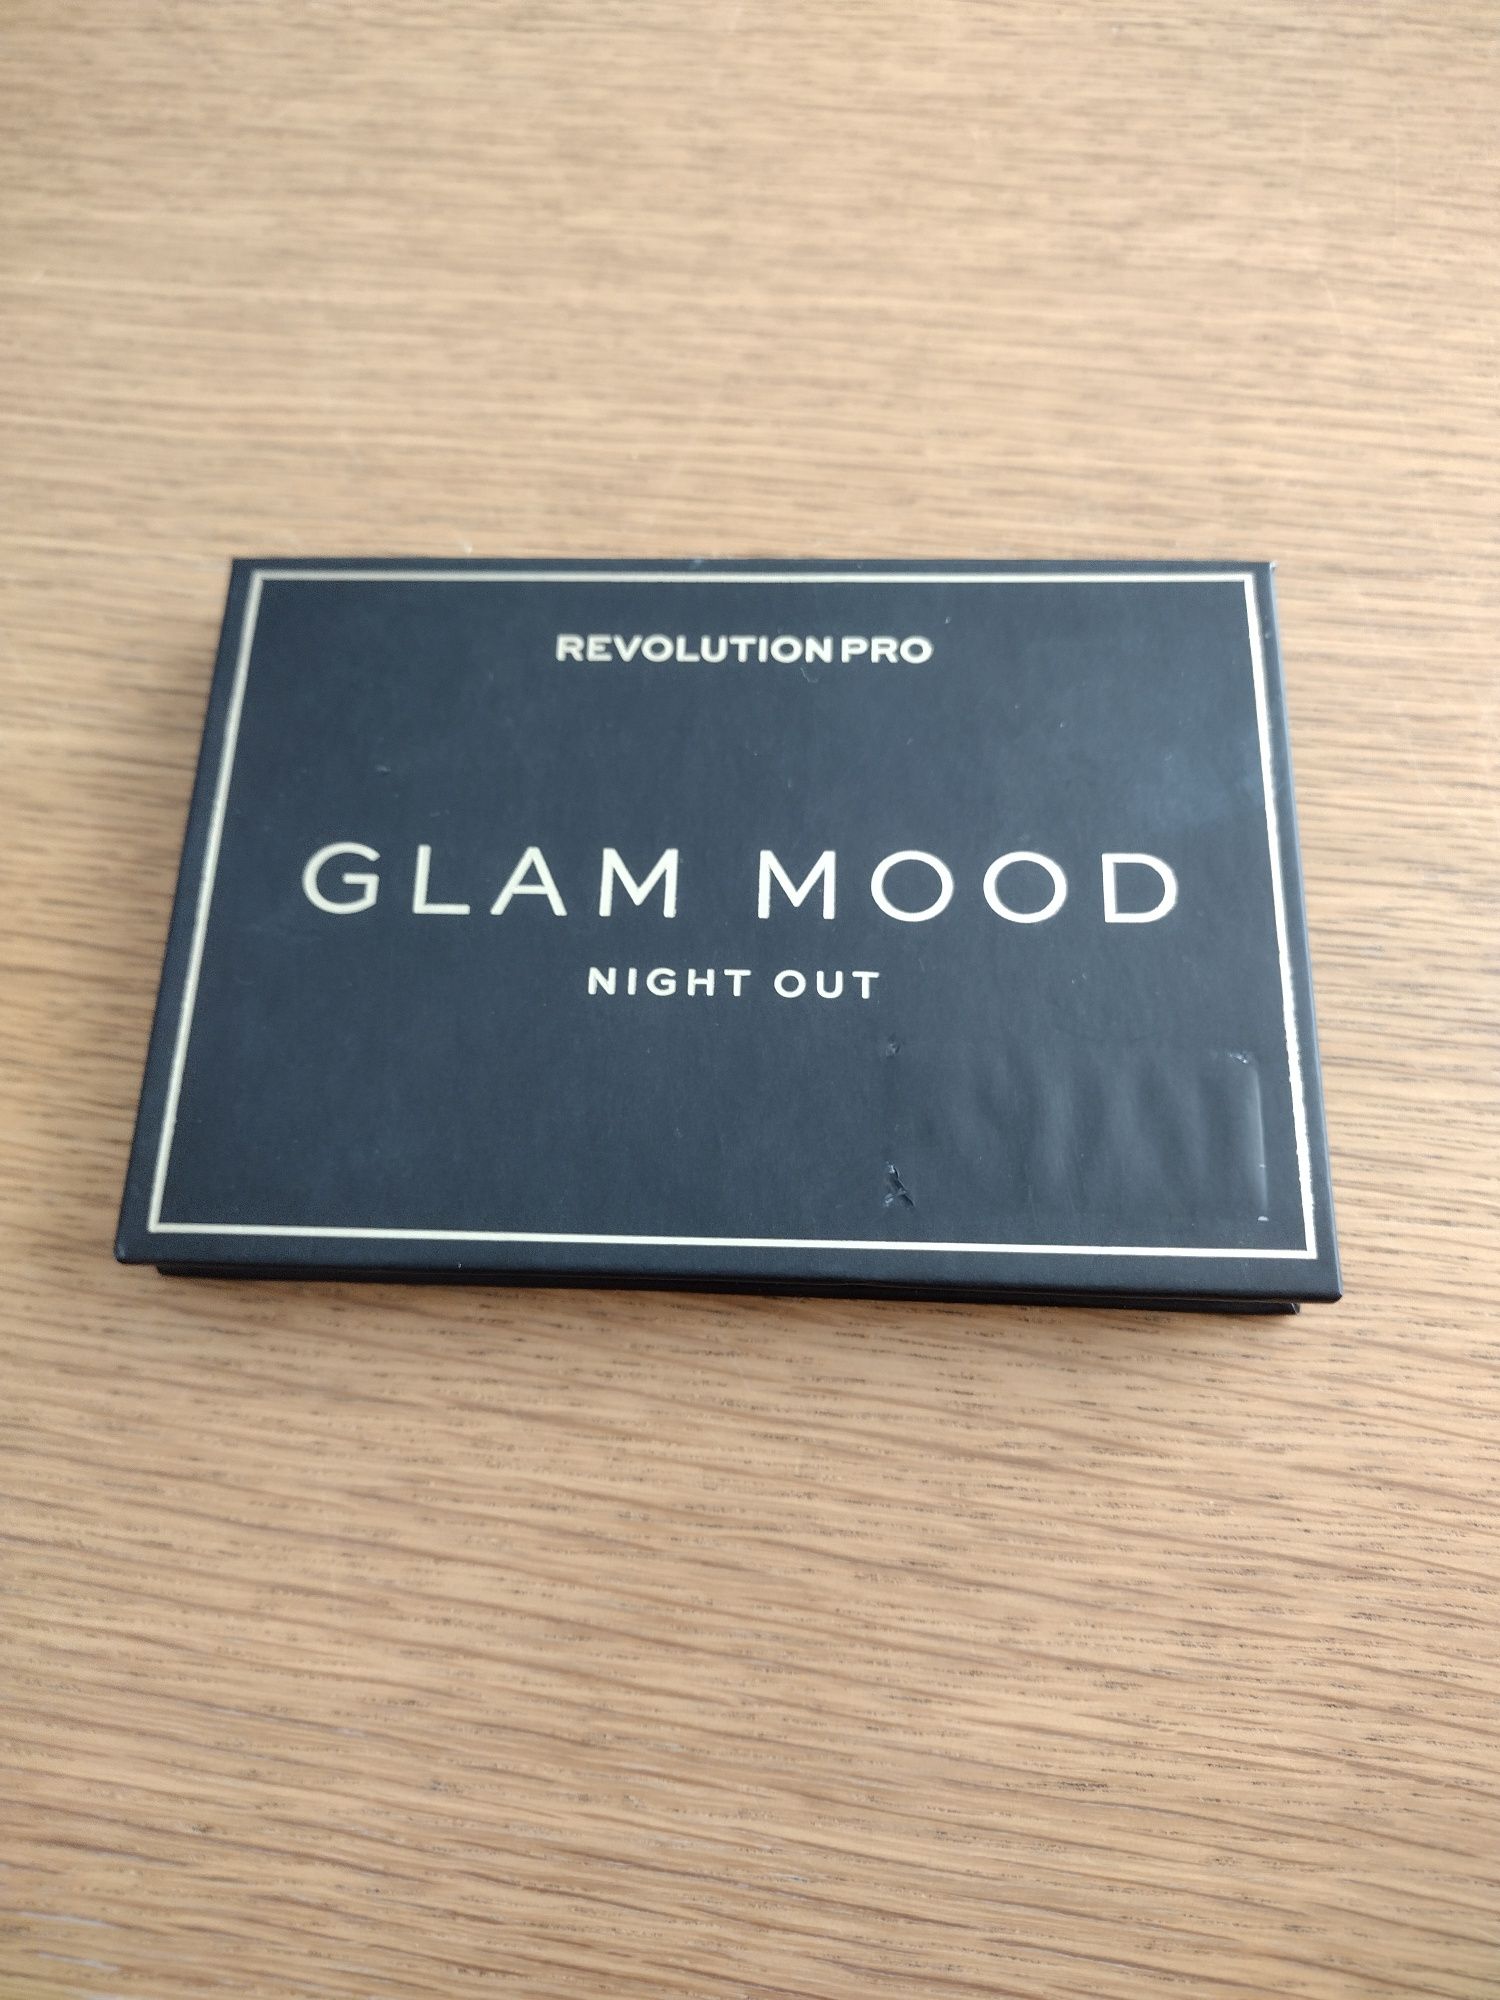 GLAM MOOD revolution pro night out